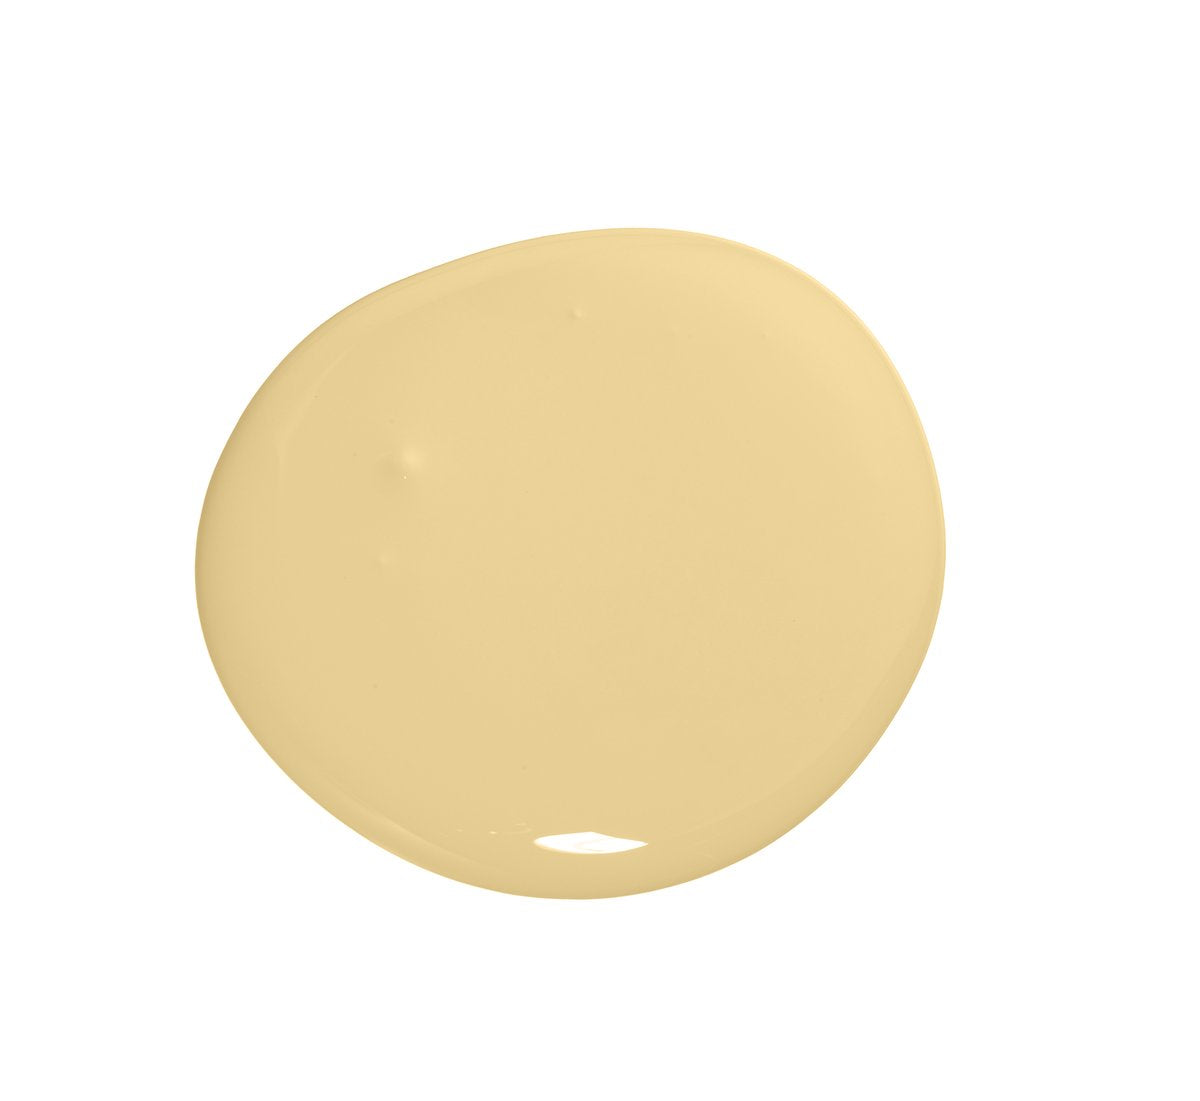 Colourtrend Lemon Curd | Same Day Dublin and Nationwide Paint in Ireland Delivery by Weirs of Baggot Street - Official Colourtrend Stockist